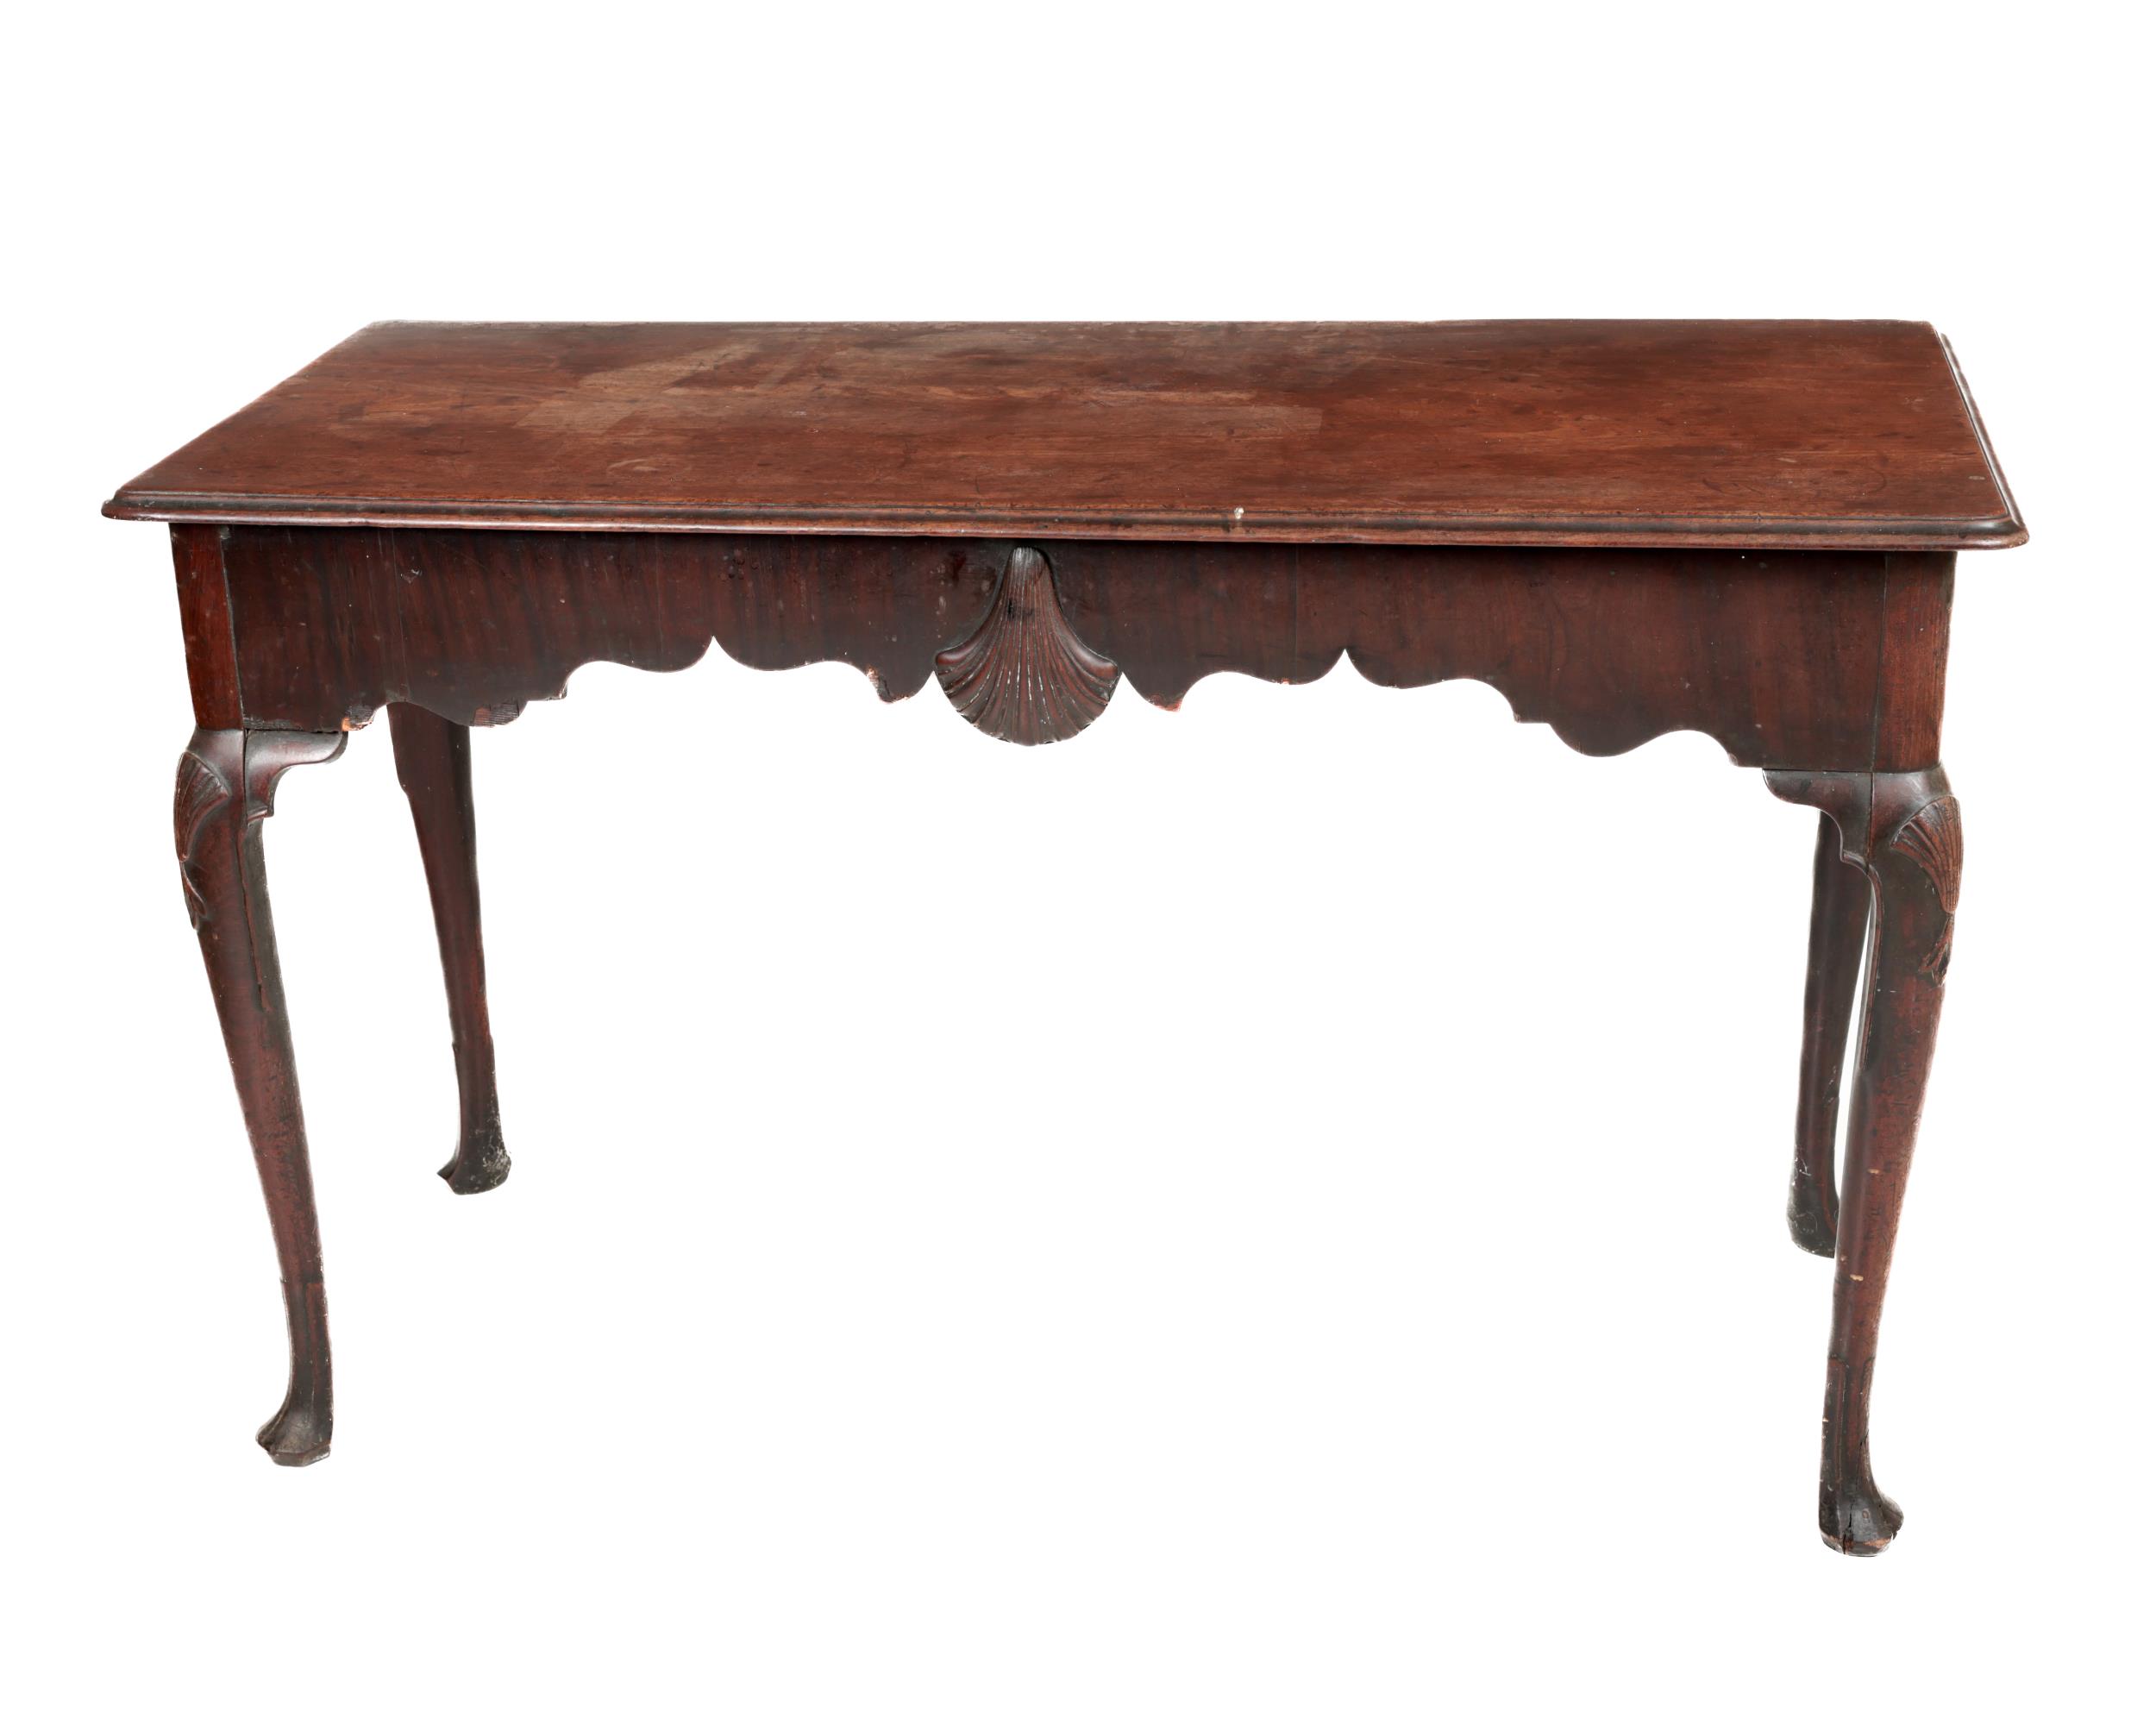 A fine quality 19th Century Irish mahogany Side Table, the plain moulded top over a shaped frieze